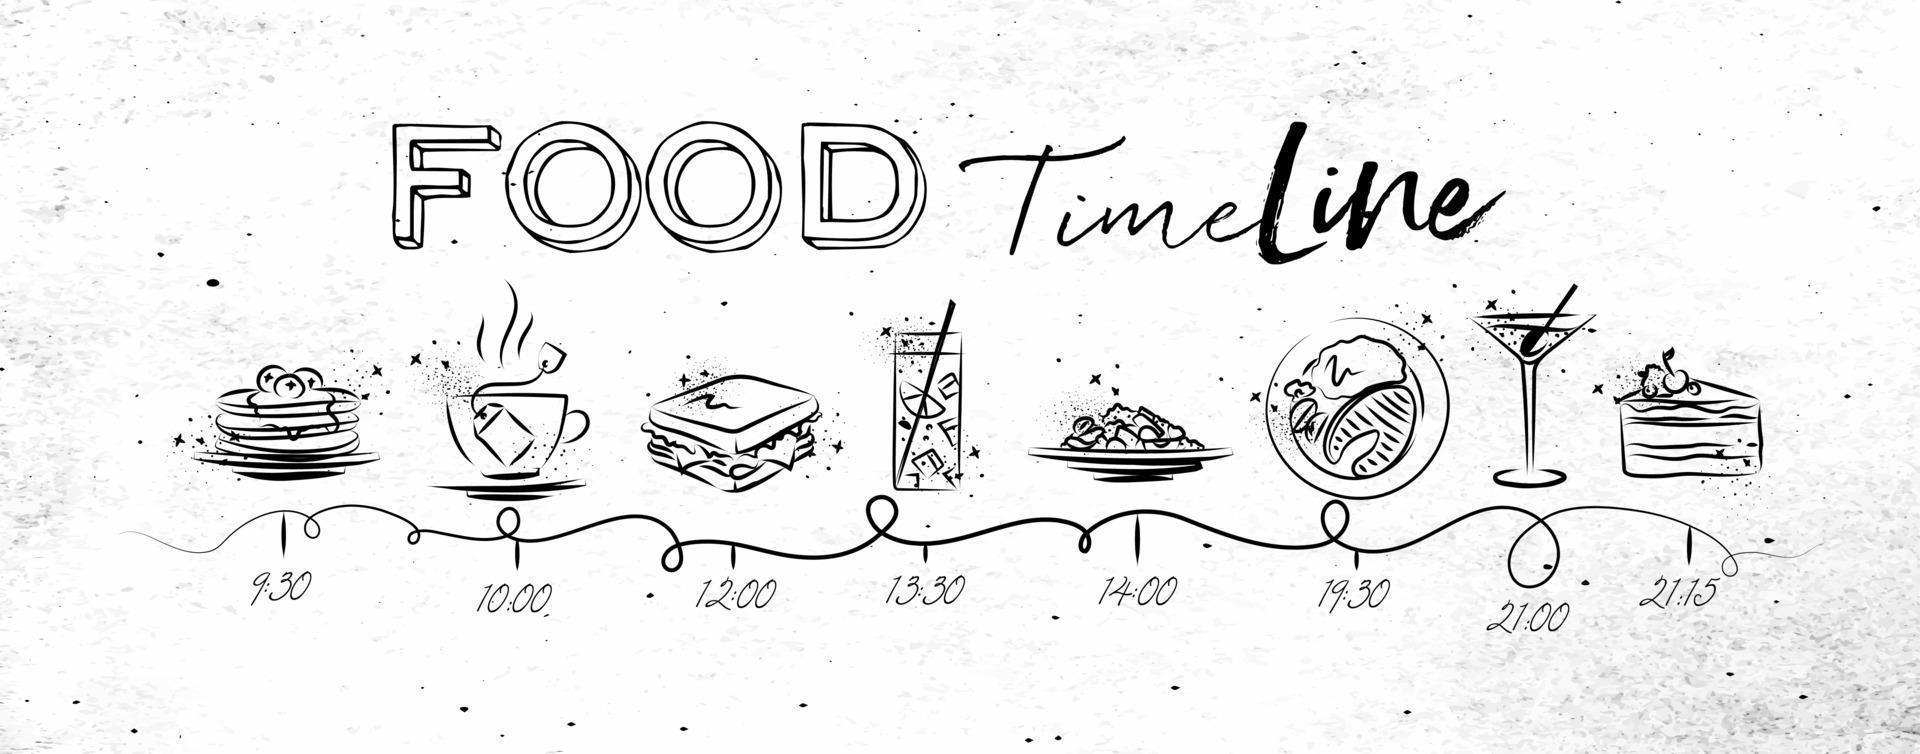 Timeline on healthy food theme illustrated time of meal and food icons drawing with black lines on dirty paper background vector